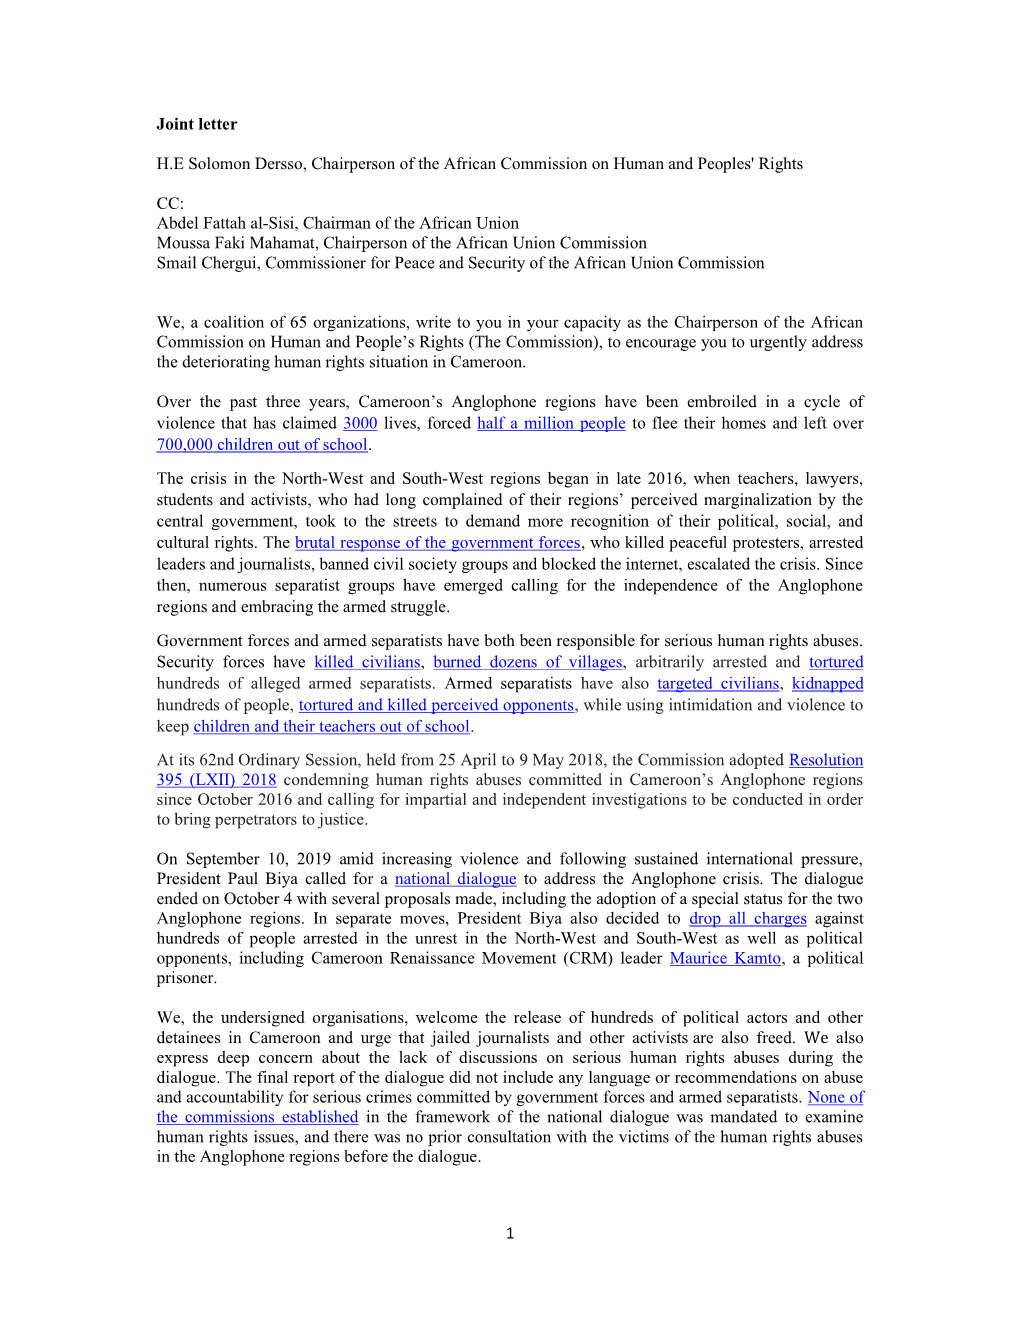 Joint Civil Society Letter to the Chairperson of the ACHPR